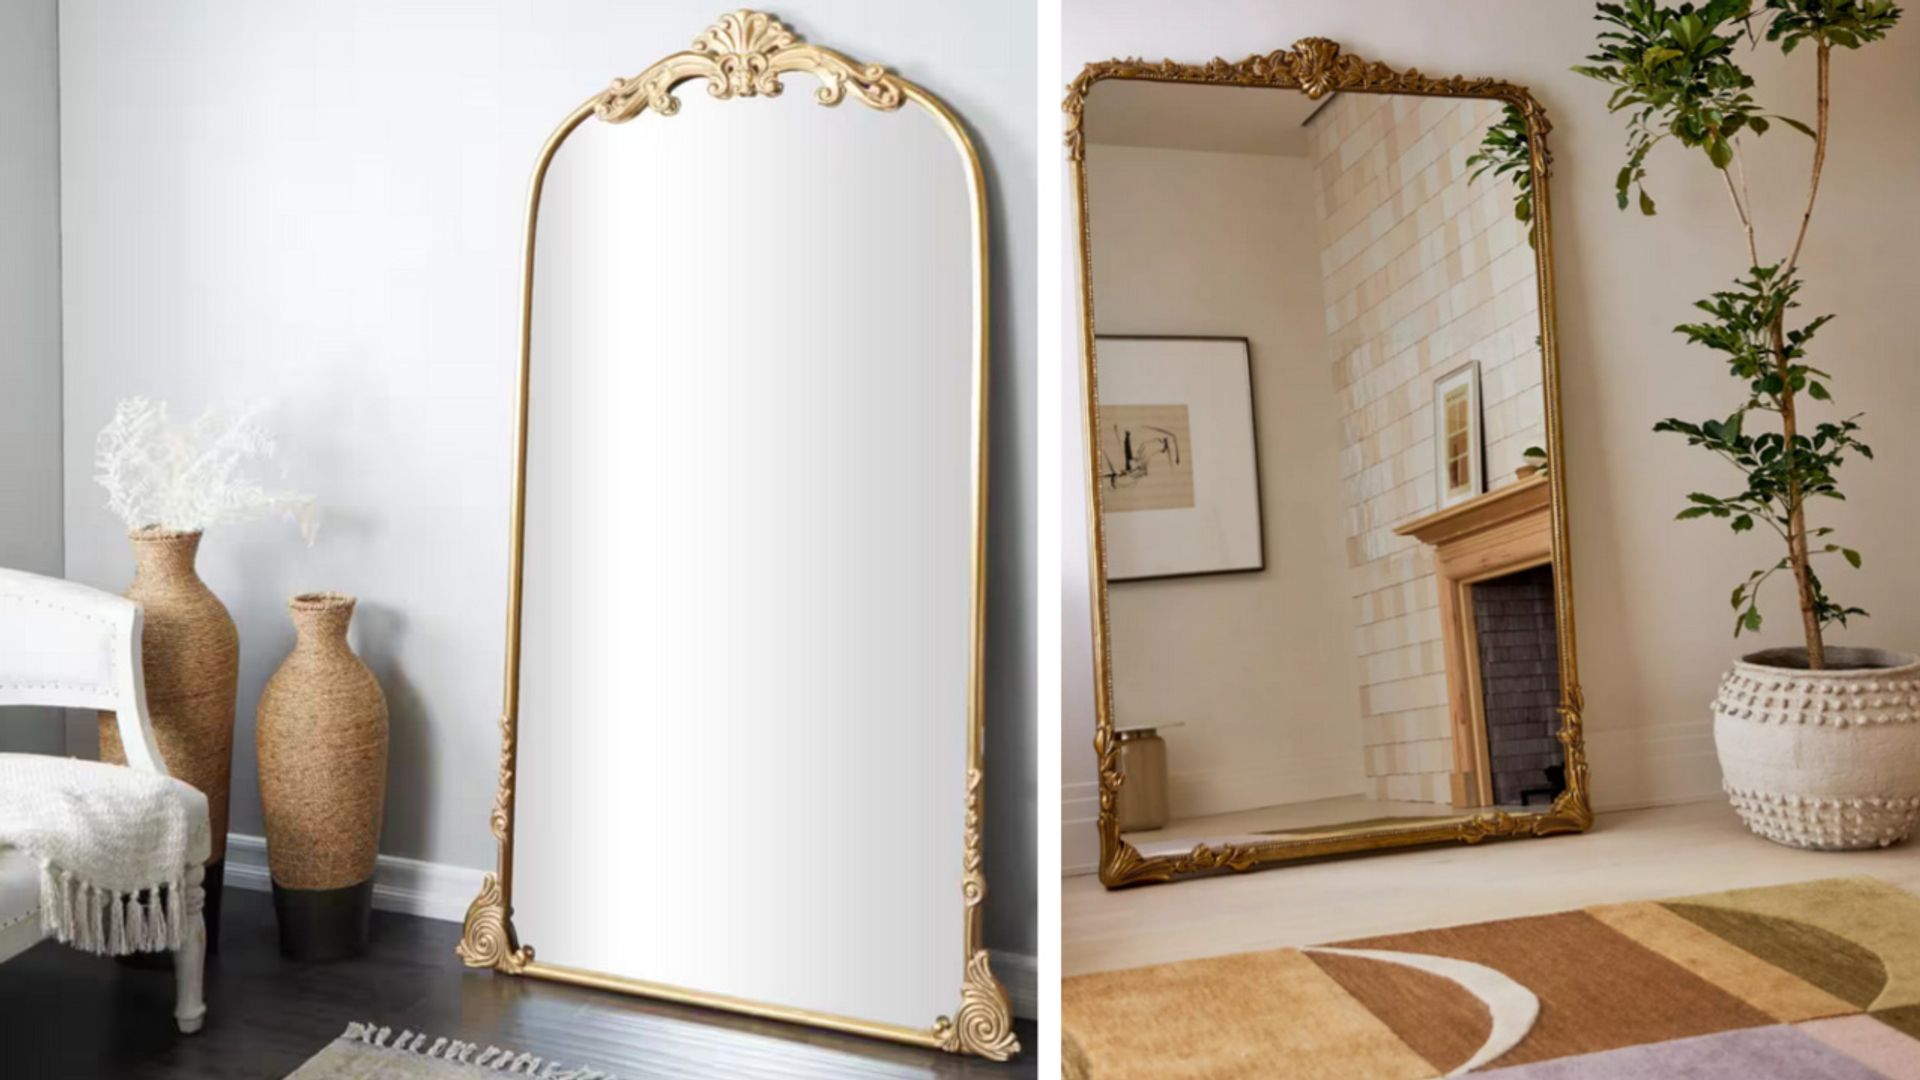 Can't find Costco's viral Anthropologie-lookalike floor mirror? I found these 6 options to shop instead